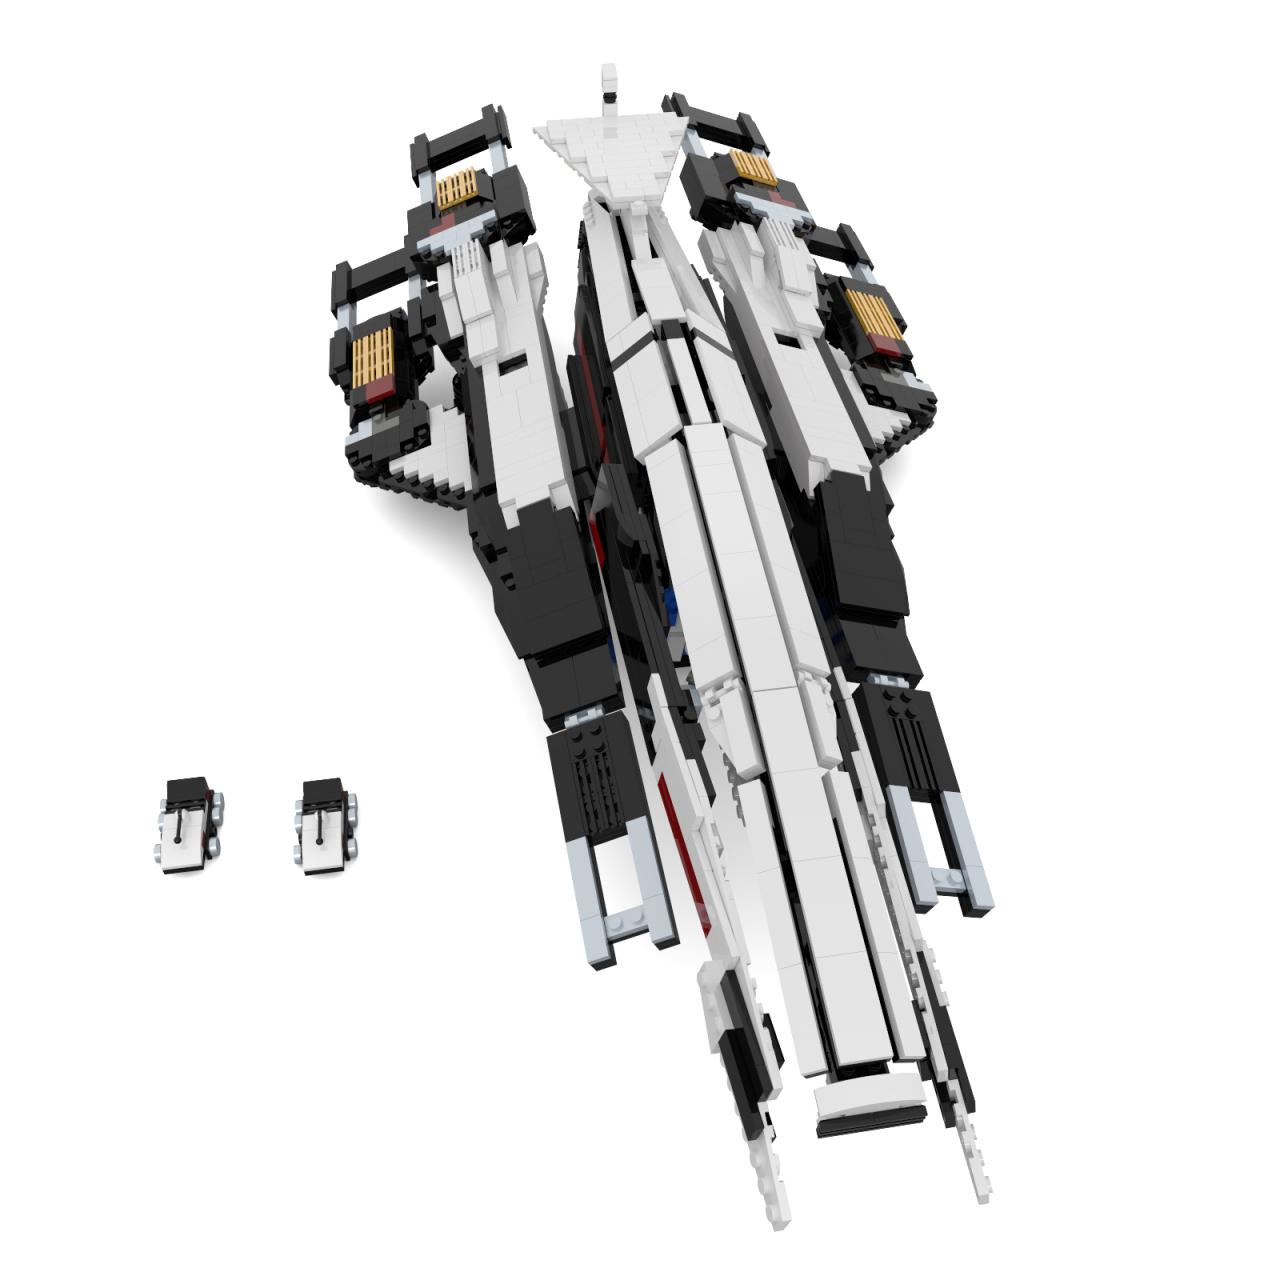 moc 21578 mass effect normandy sr 1 with 1886 pieces 2 - LEPIN Germany